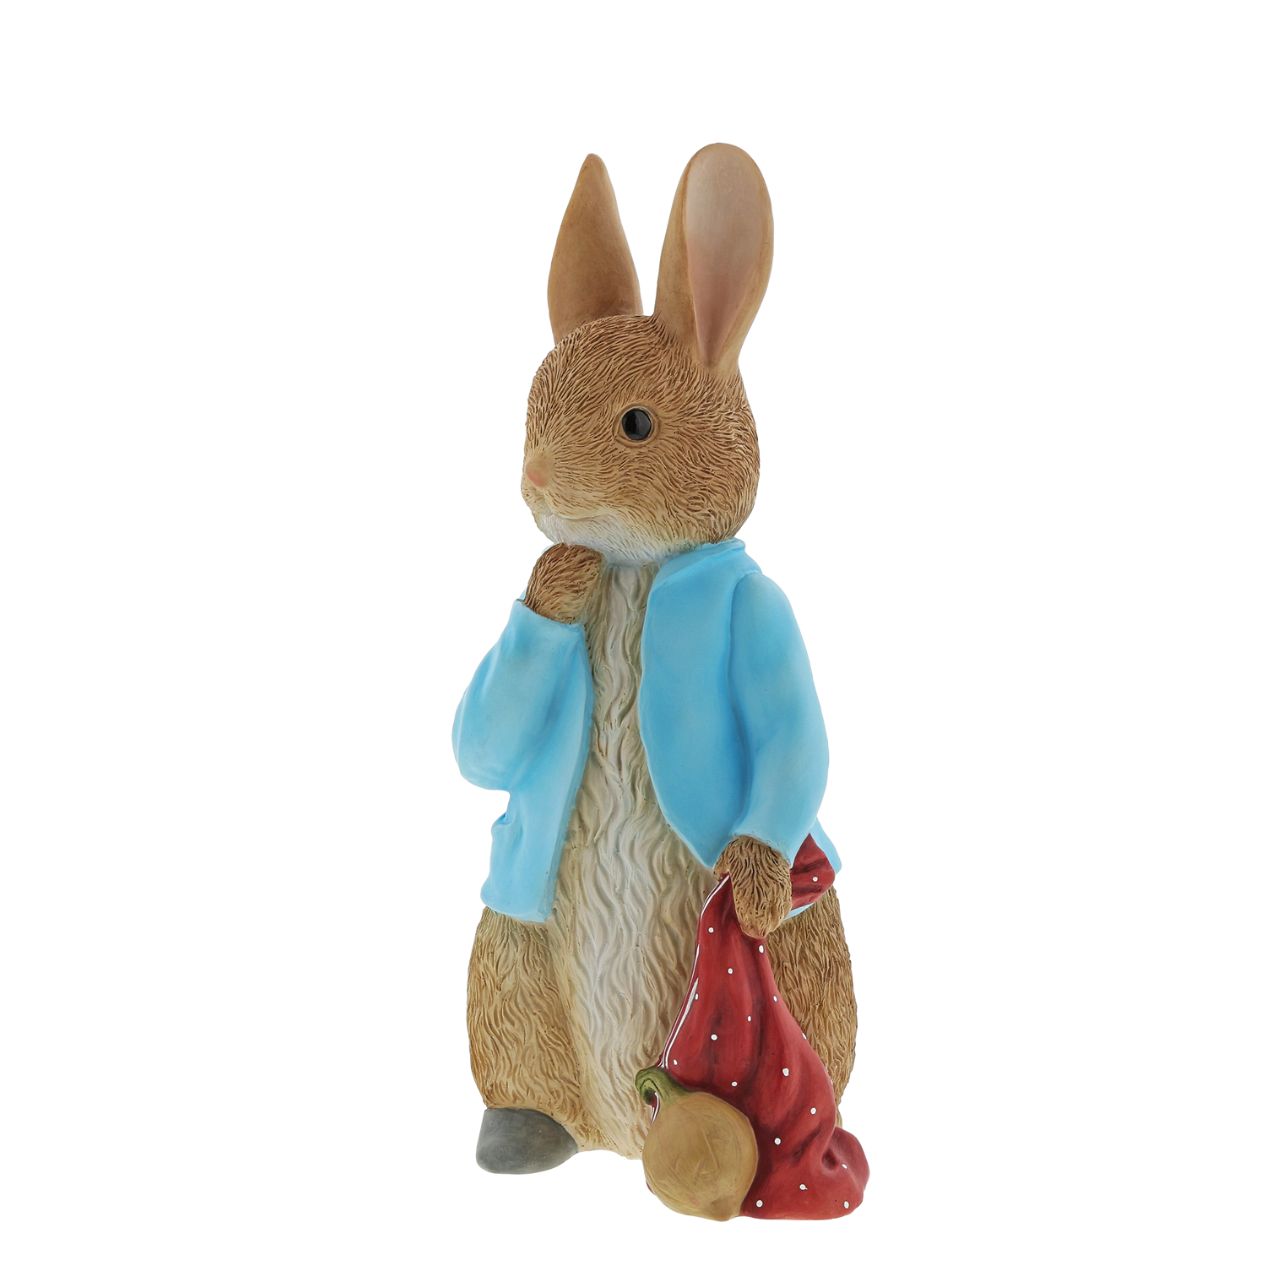 Big, bold and perfectly delightful is this Peter Rabbit Statement figurine. Standing 35.0cm tall, this figurine is sure to make a statement around the home, office or garden. Peter has been dressed in his iconic blue jacket and have been finished with a weather proof paint, making this a stunning yet versatile piece.